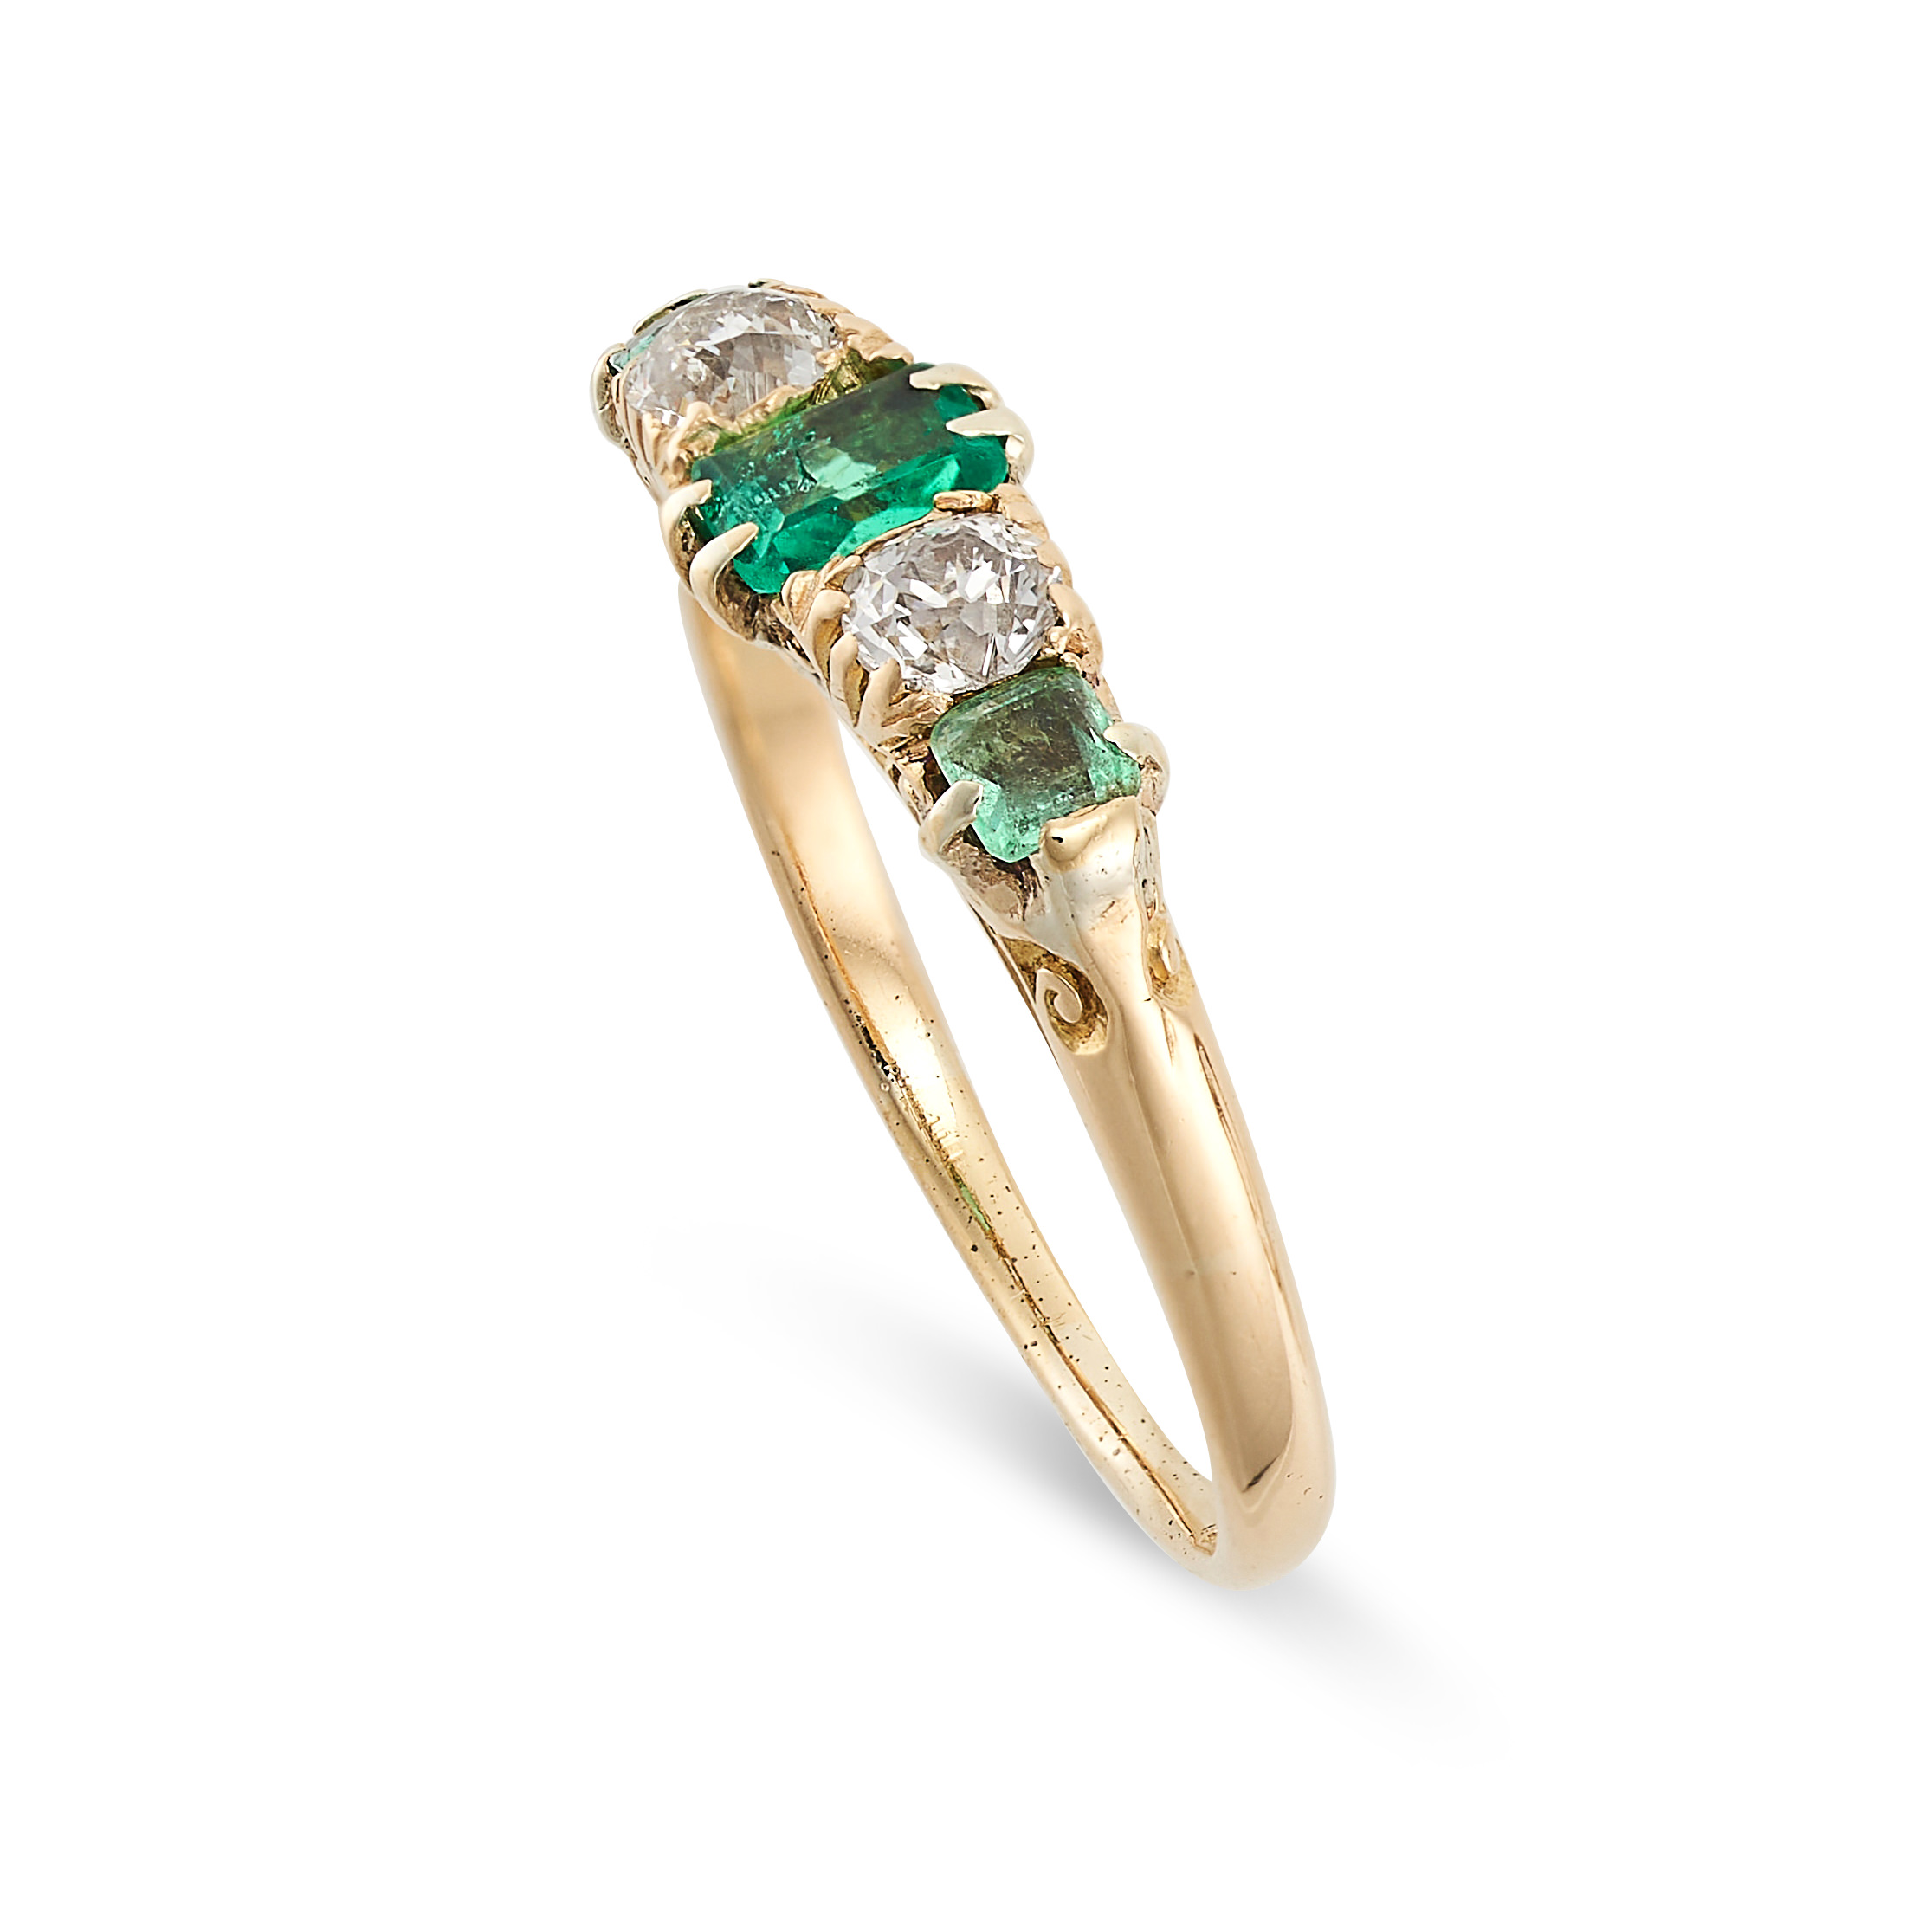 A VINTAGE EMERALD AND DIAMOND RING set with three step cut emeralds, accented by old cut diamonds, - Image 2 of 2